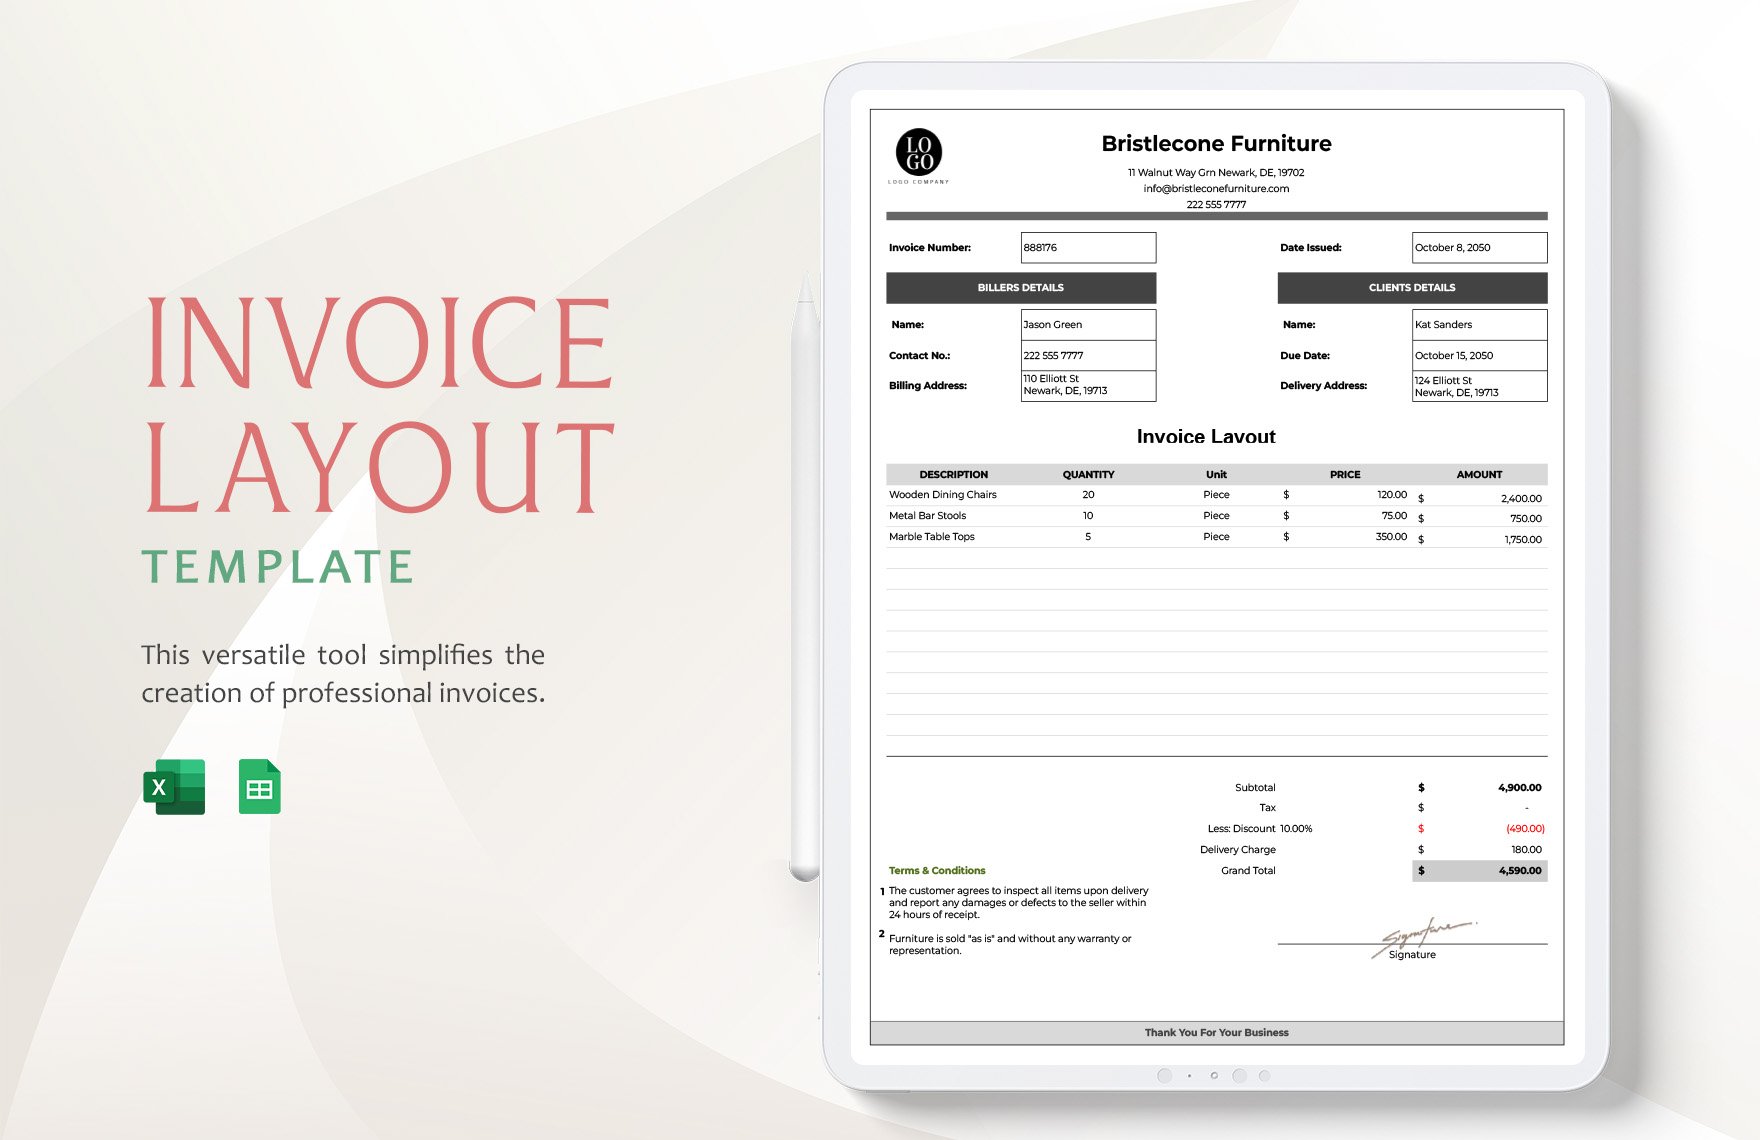 Invoice Layout Template in Excel, Google Sheets